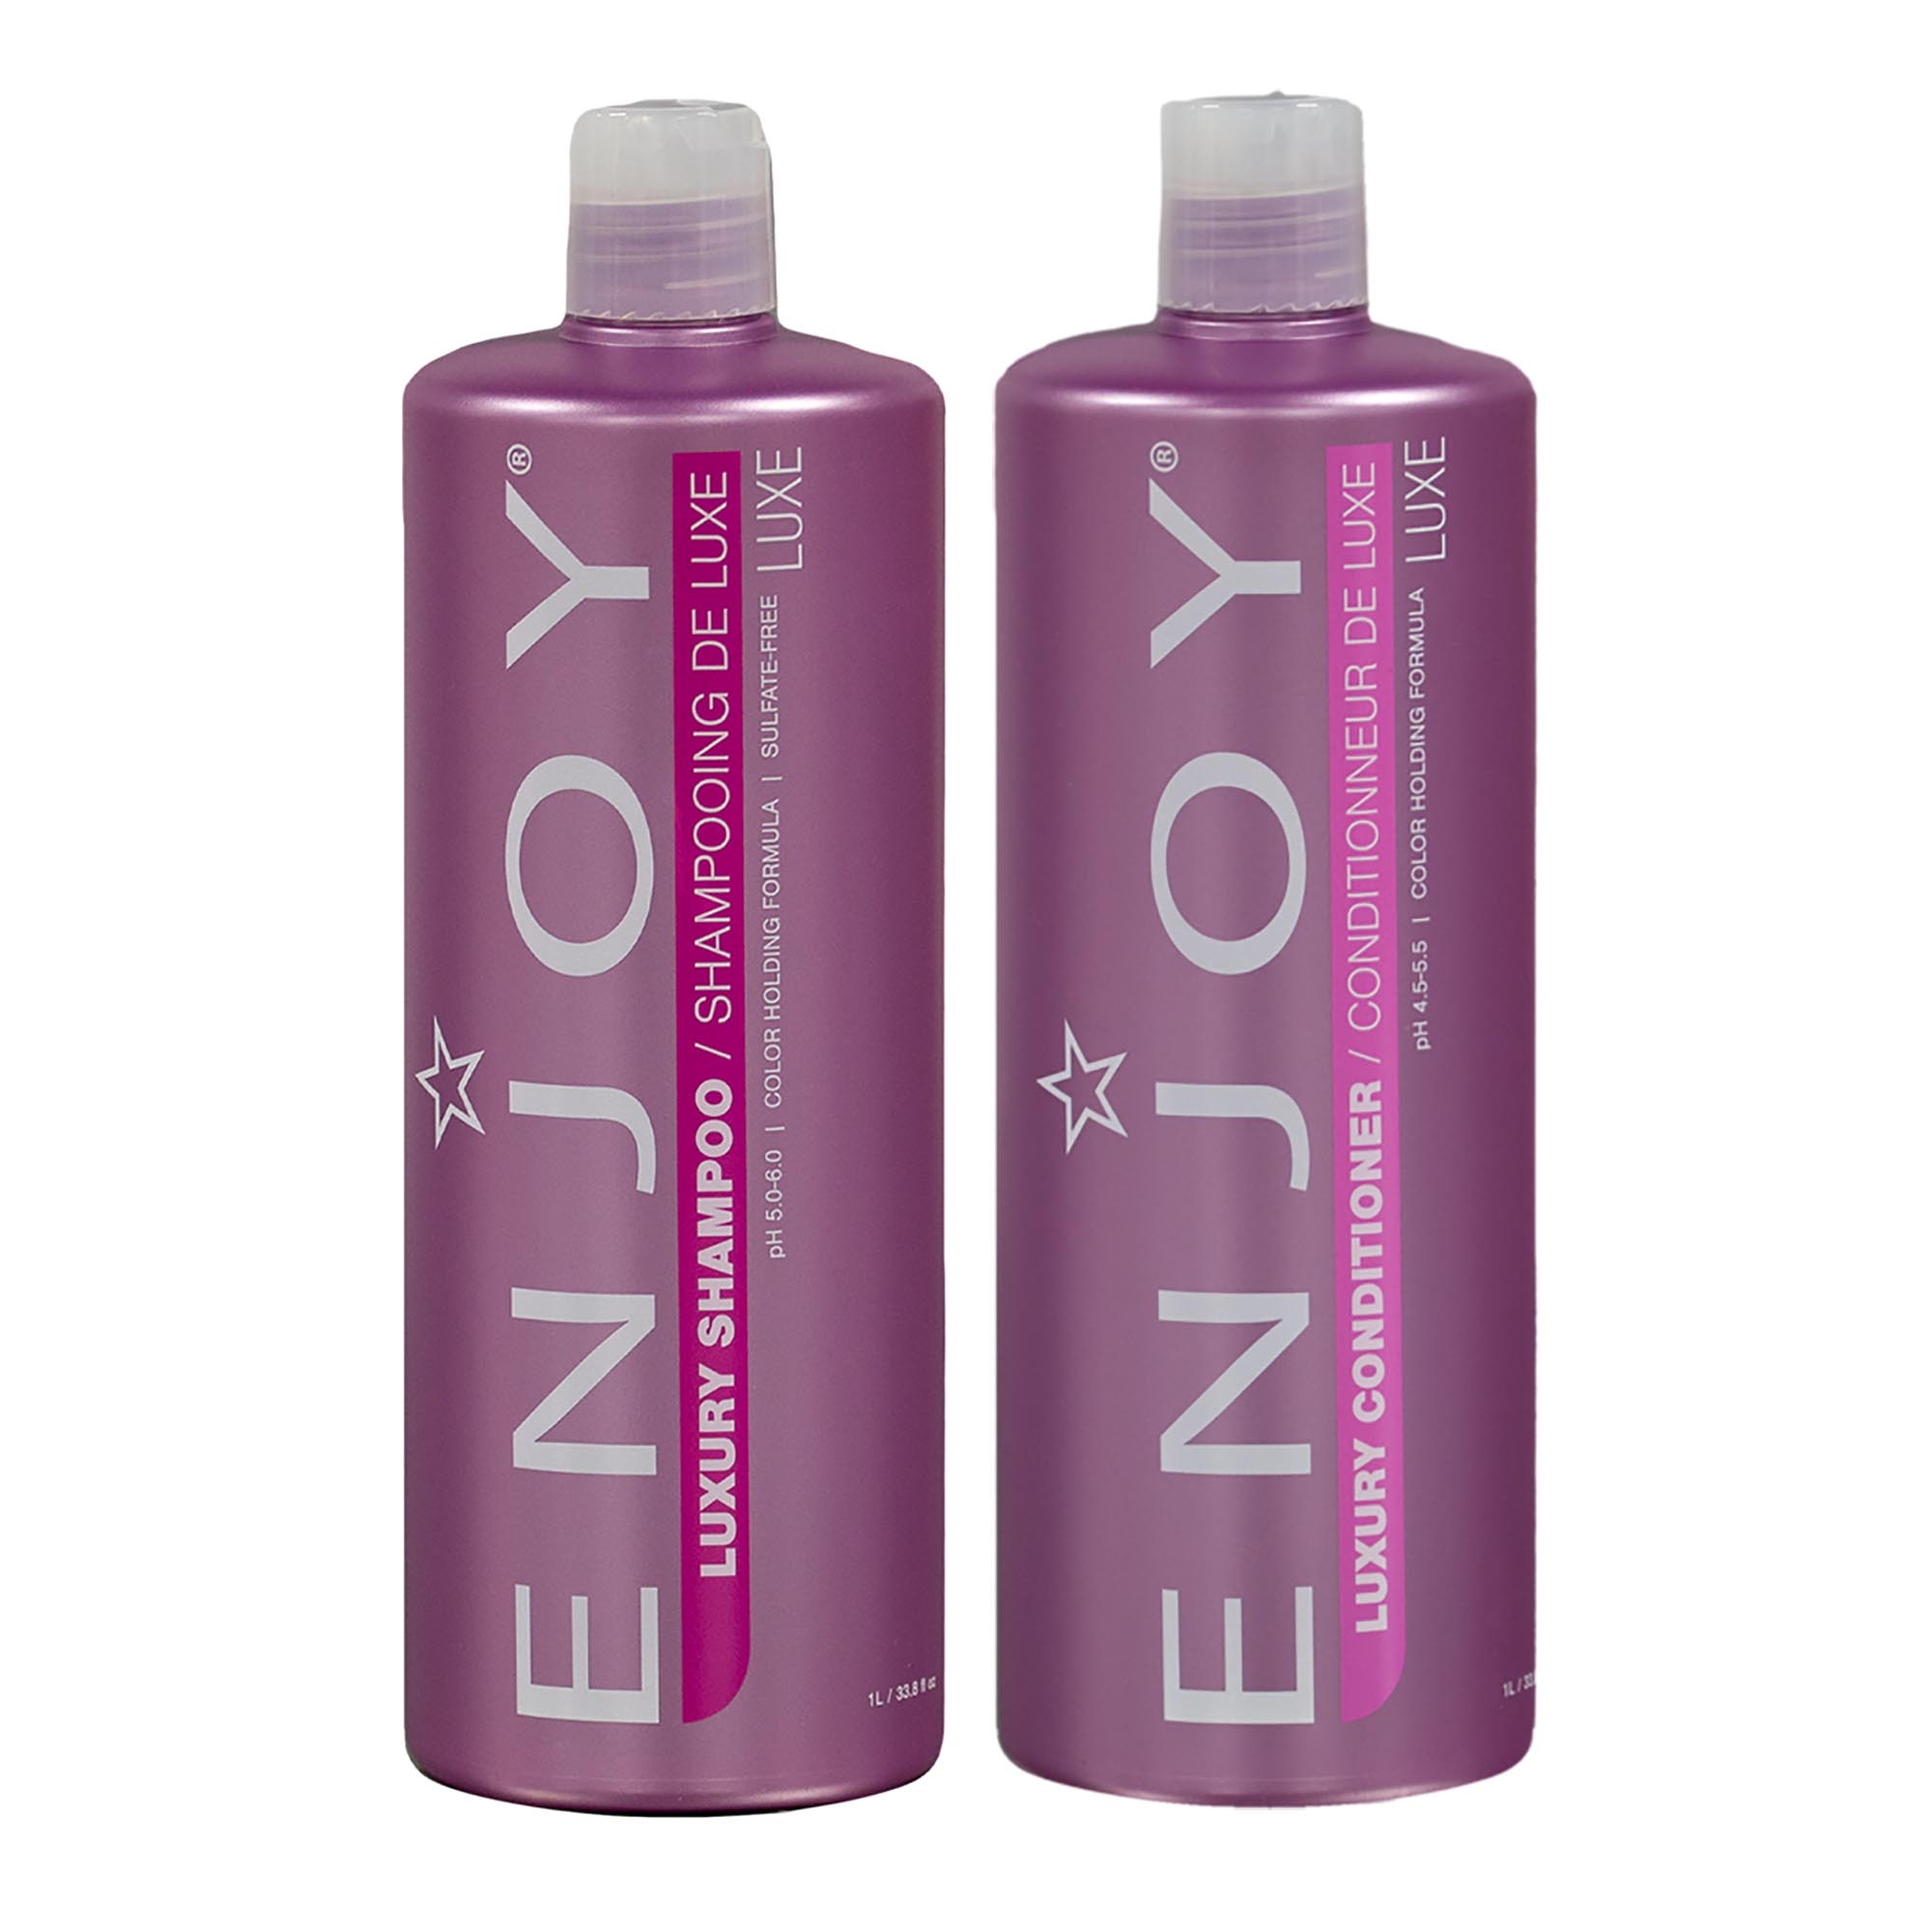 Enjoy Luxe Luxury Sulfate-Free Shampoo and Conditioner 33oz Duo ($136 Value) / 33.OZ